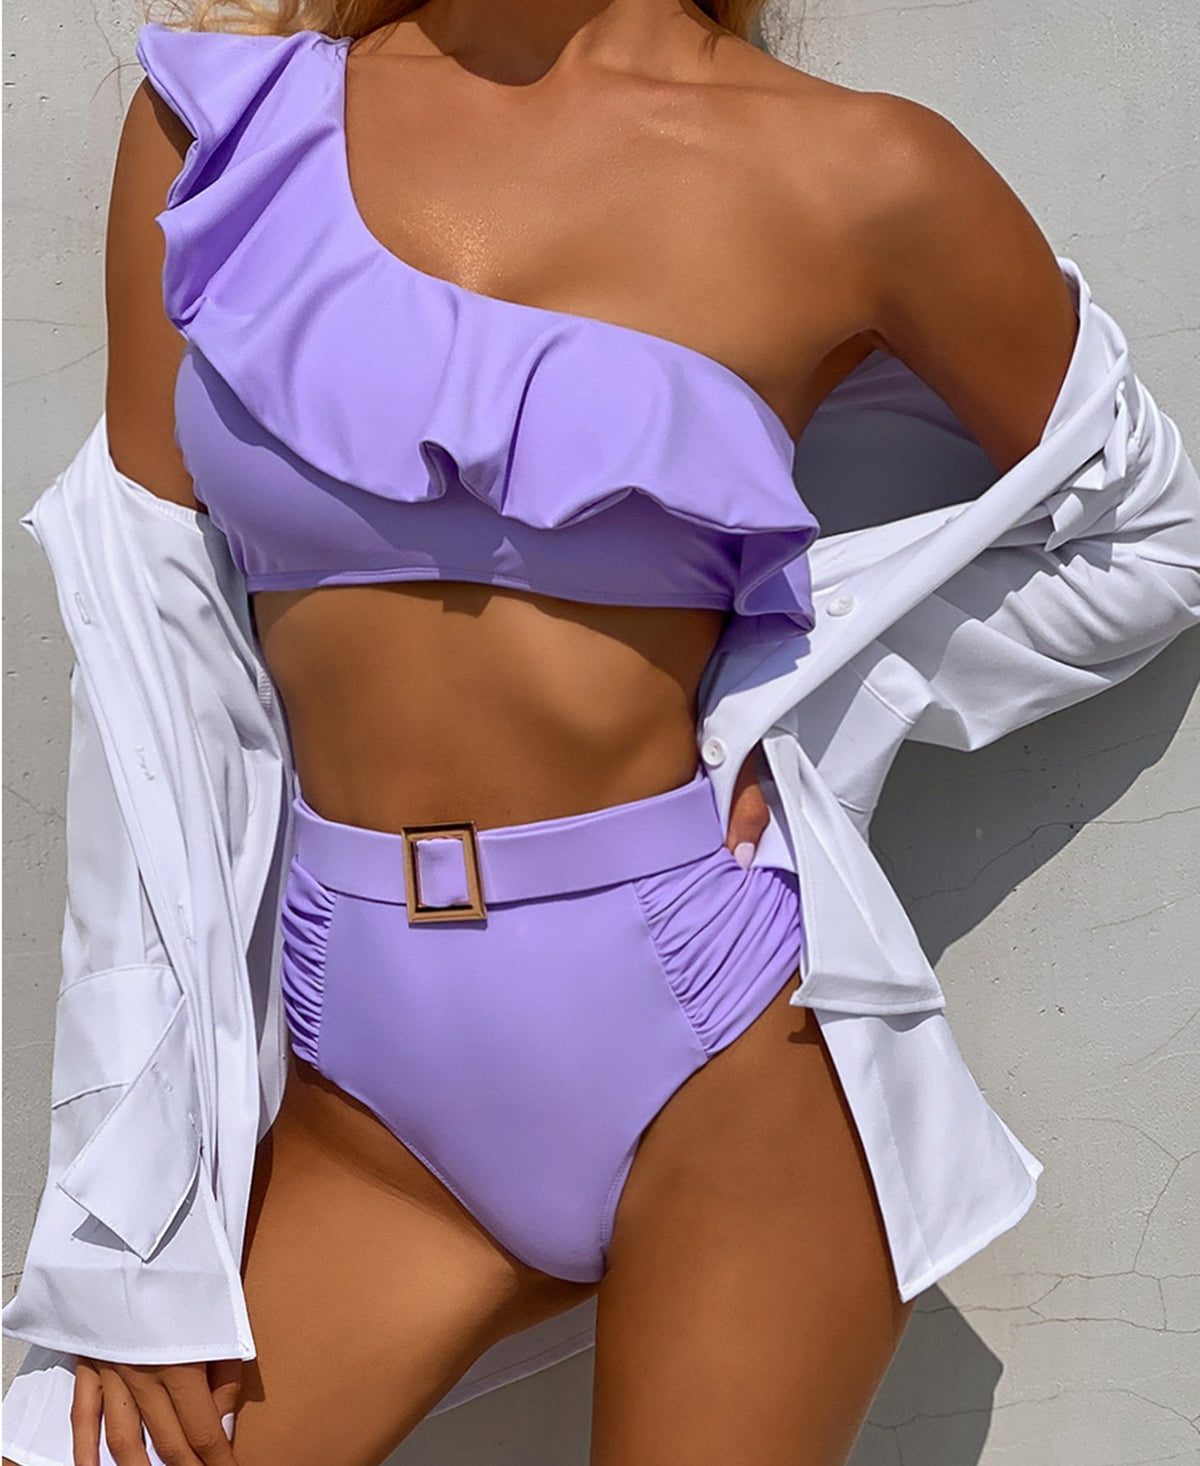 Pure-colored posterial splitter swimsuit sexy compact